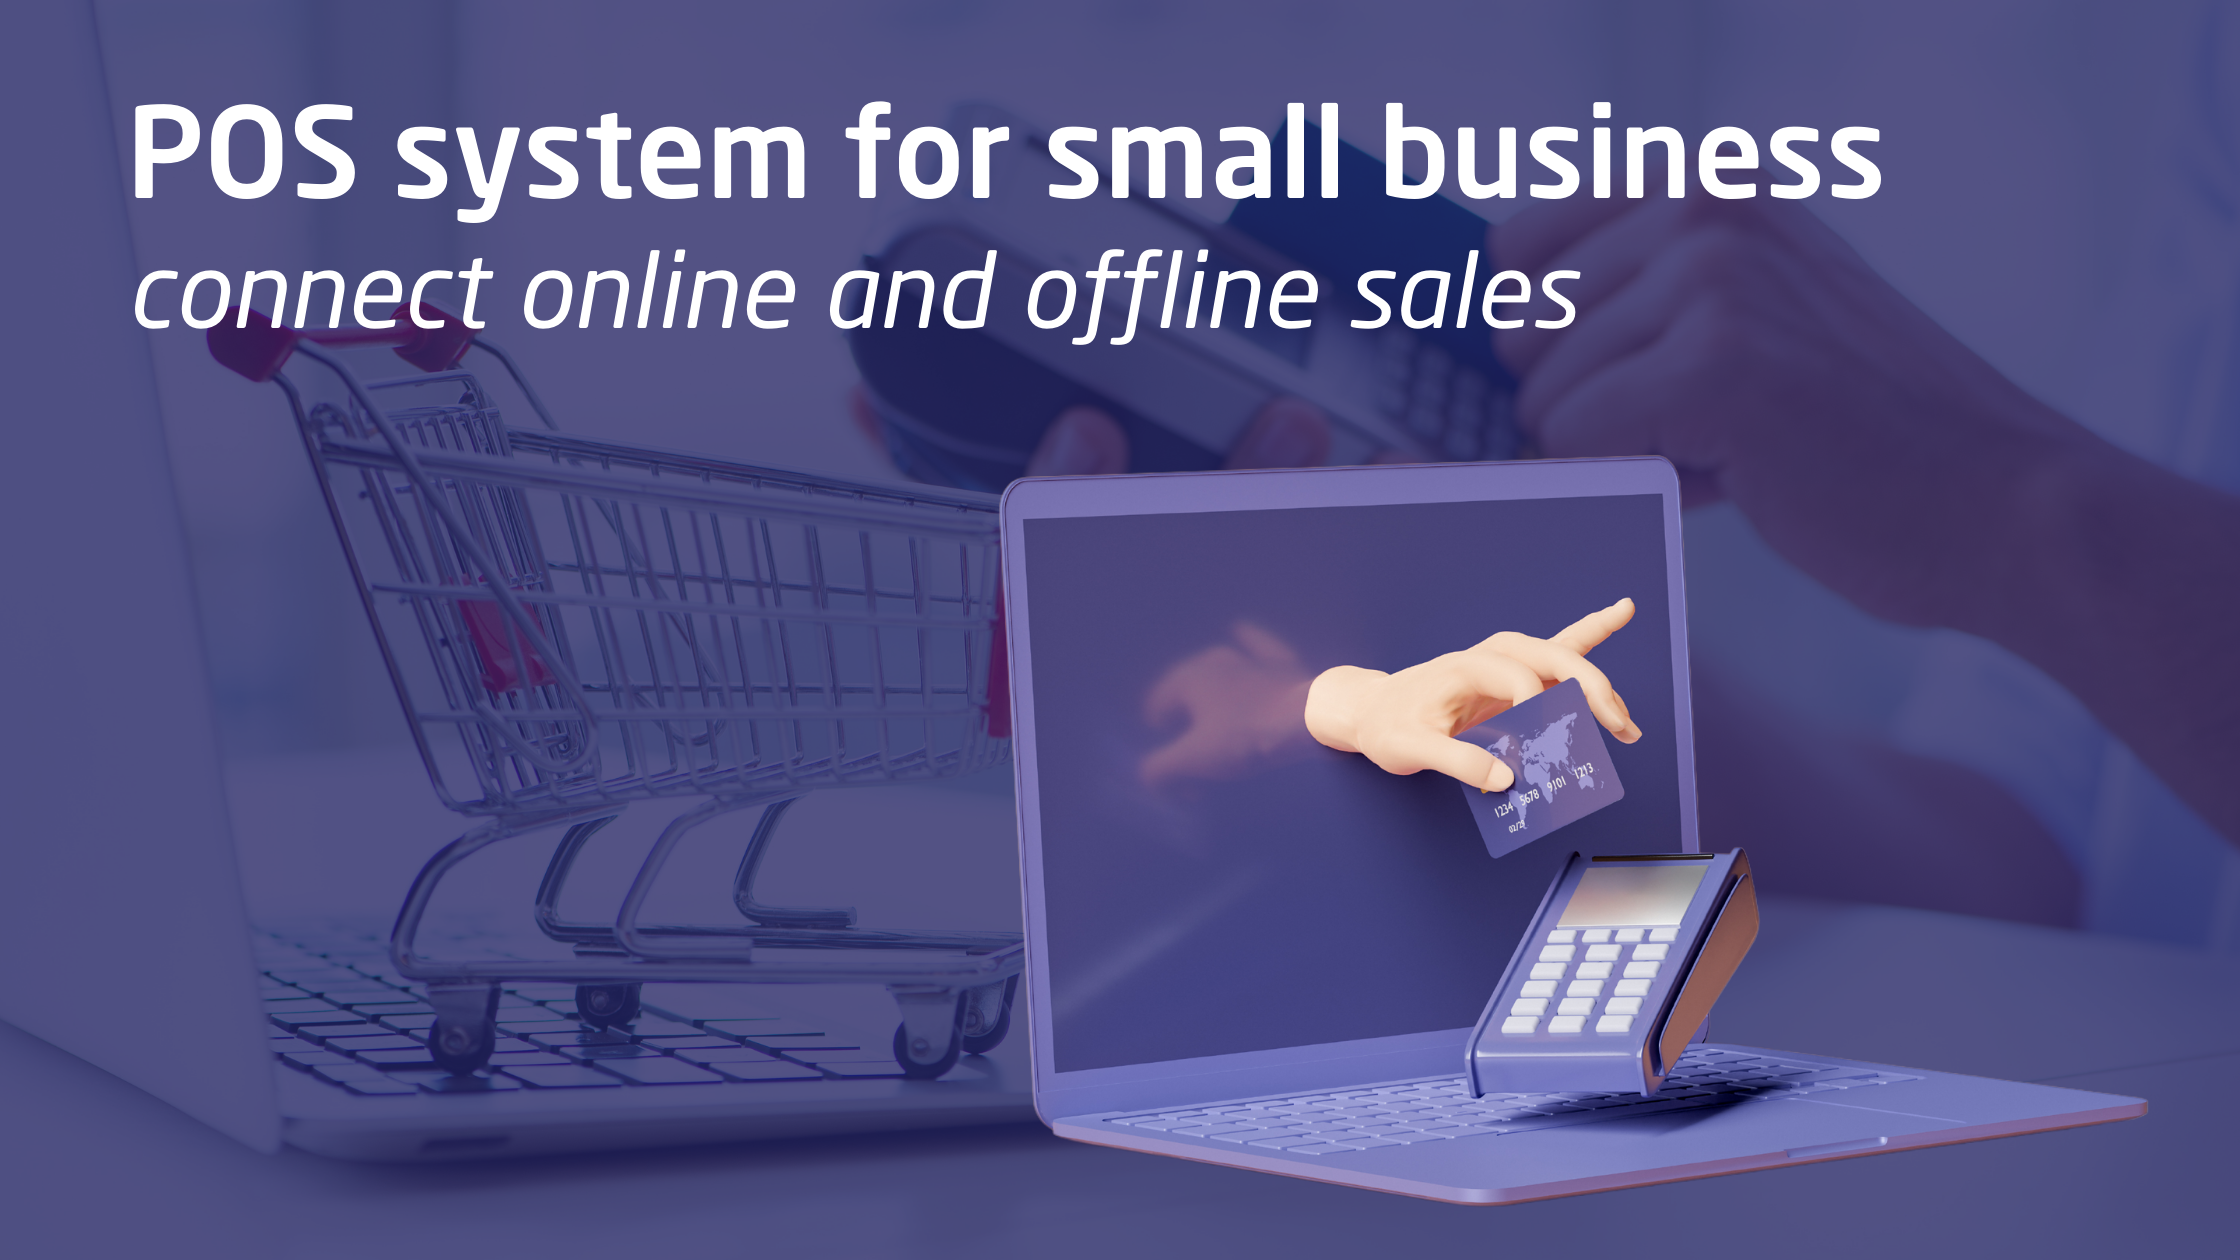 POS system for online and offline business